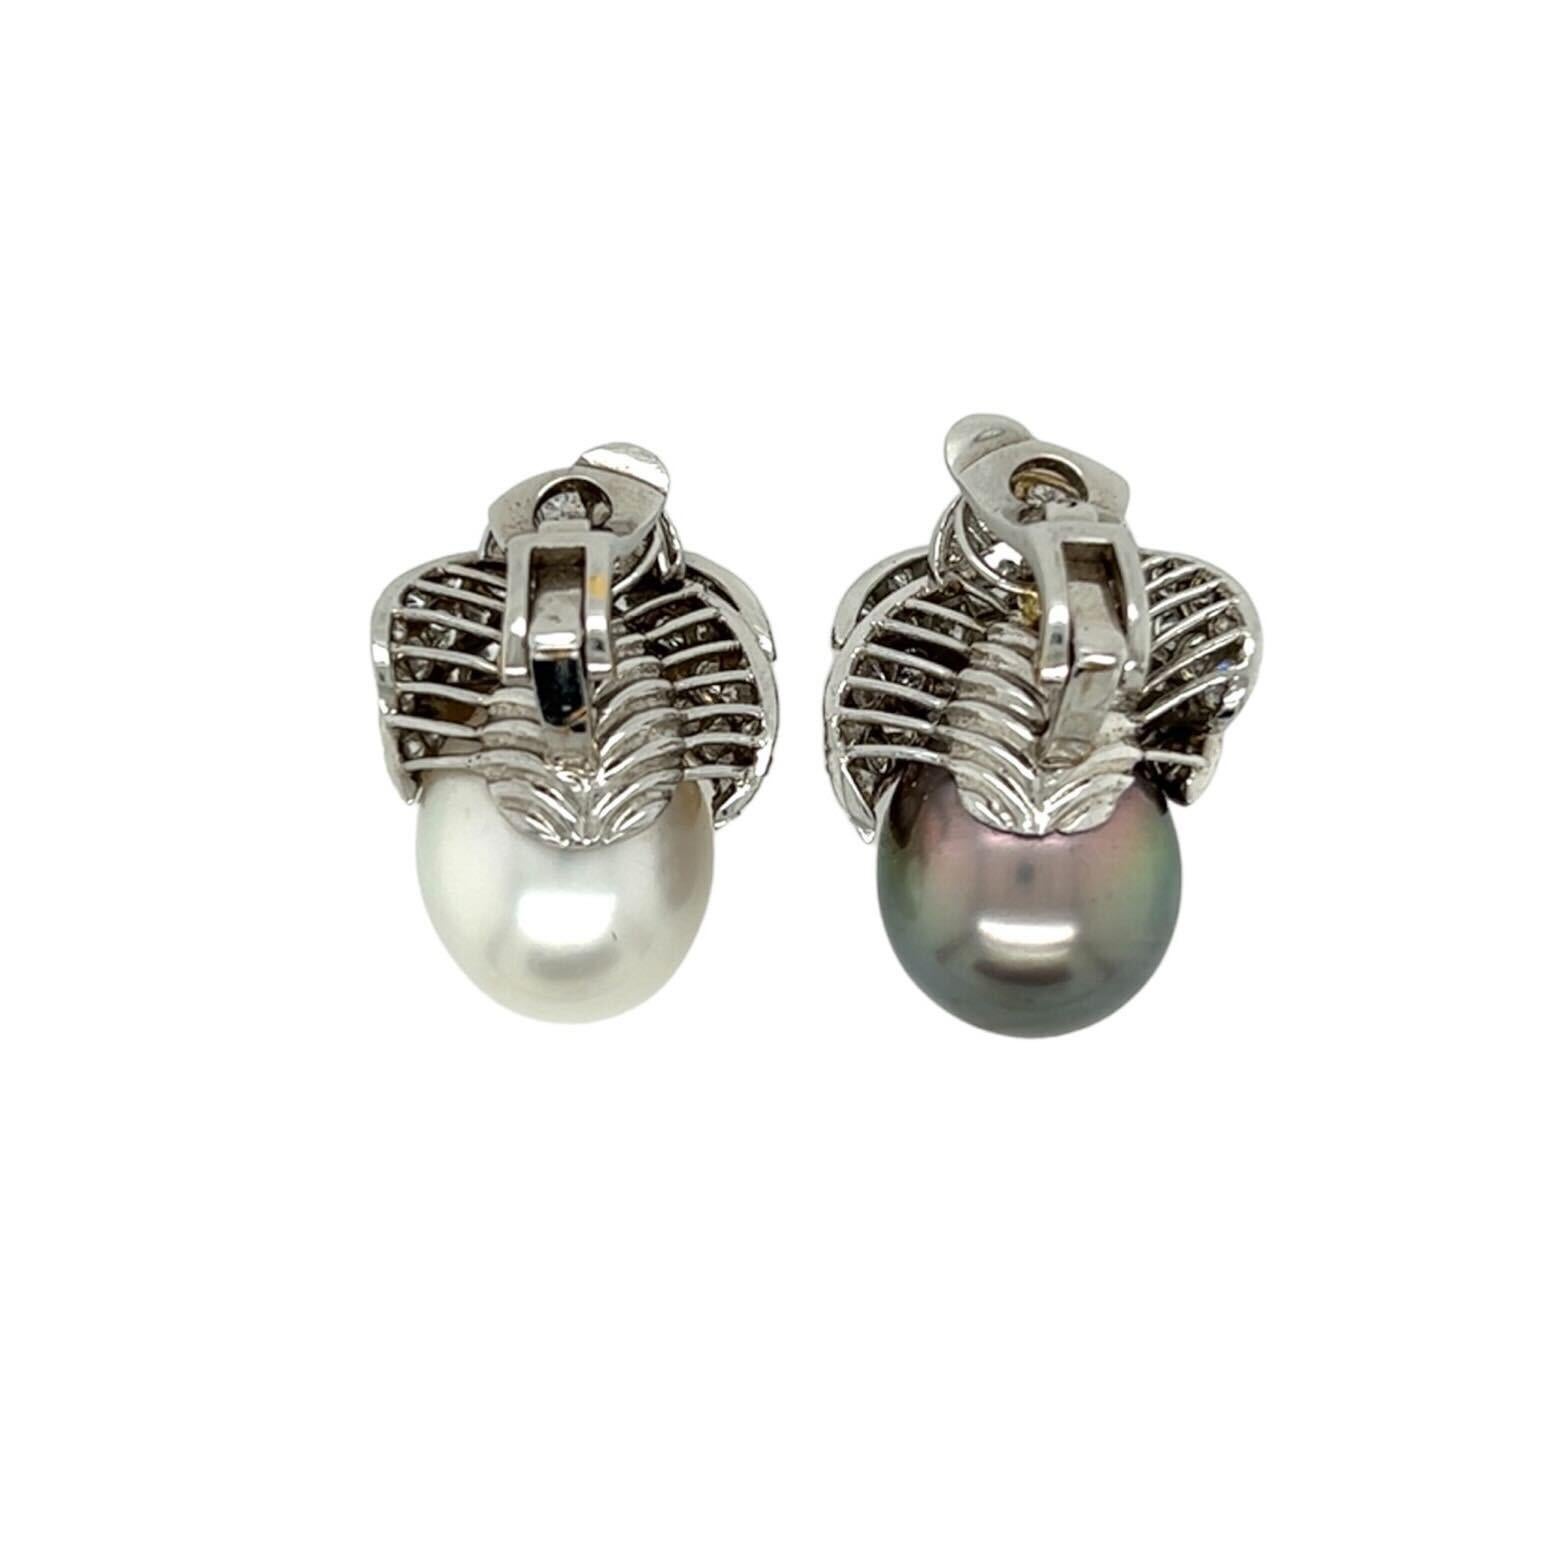 A pair of platinum, 18 karat white gold, pearl and diamond earclips.  The first earclip designed as a drop shaped Tahitian pearl topped by an overlapping surmount of thirty seven (37) platinum set brilliant cut diamonds, with an 18 karat white gold